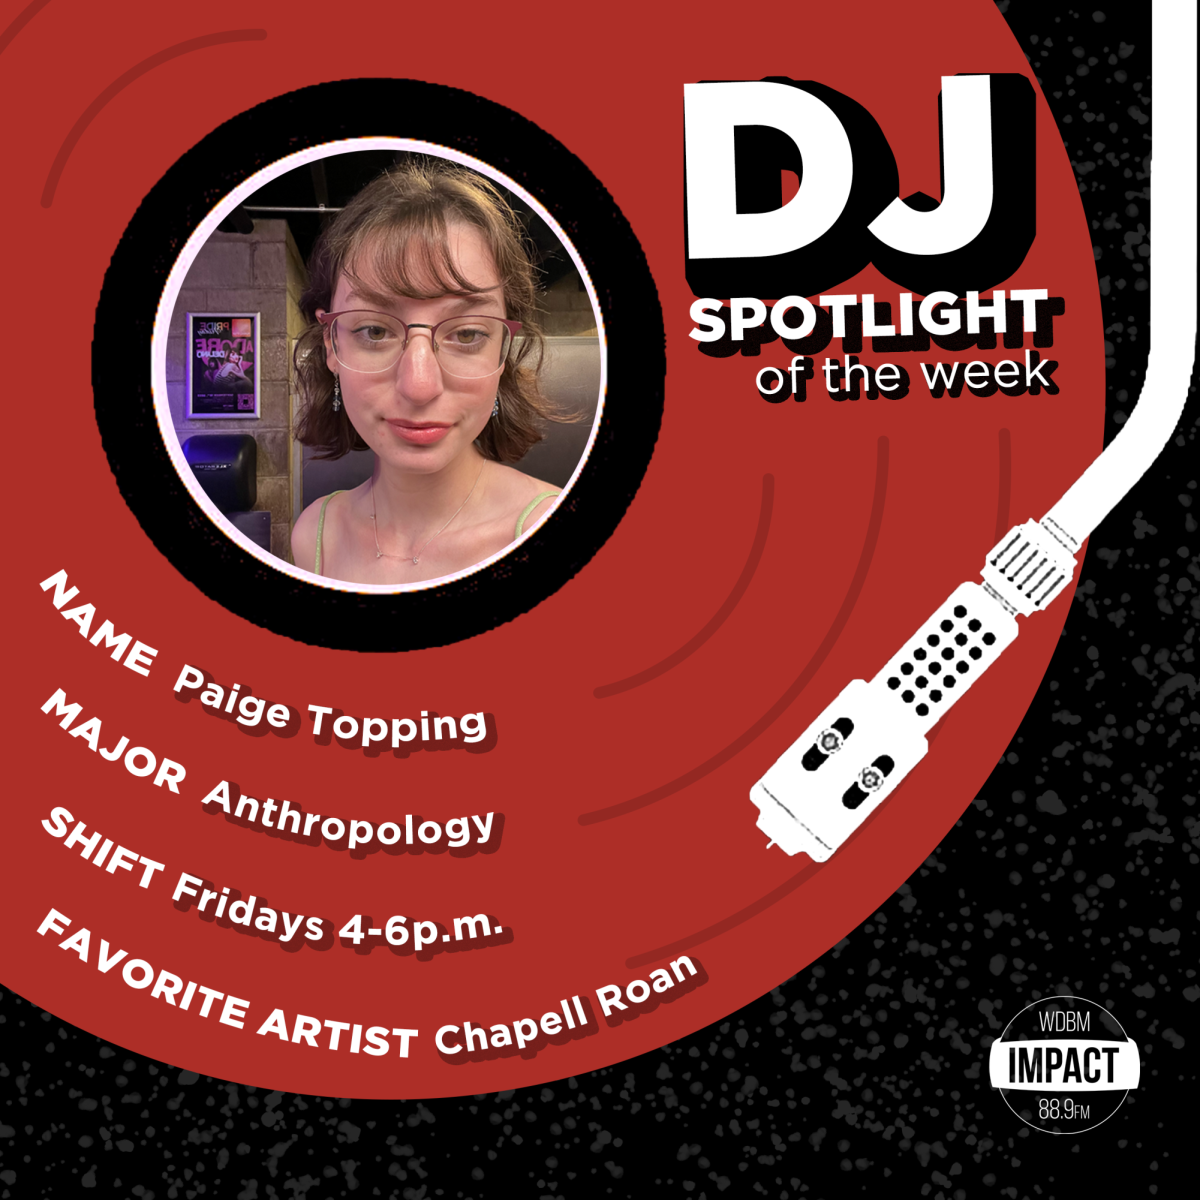 DJ Spotlight of the Week: Paige Topping